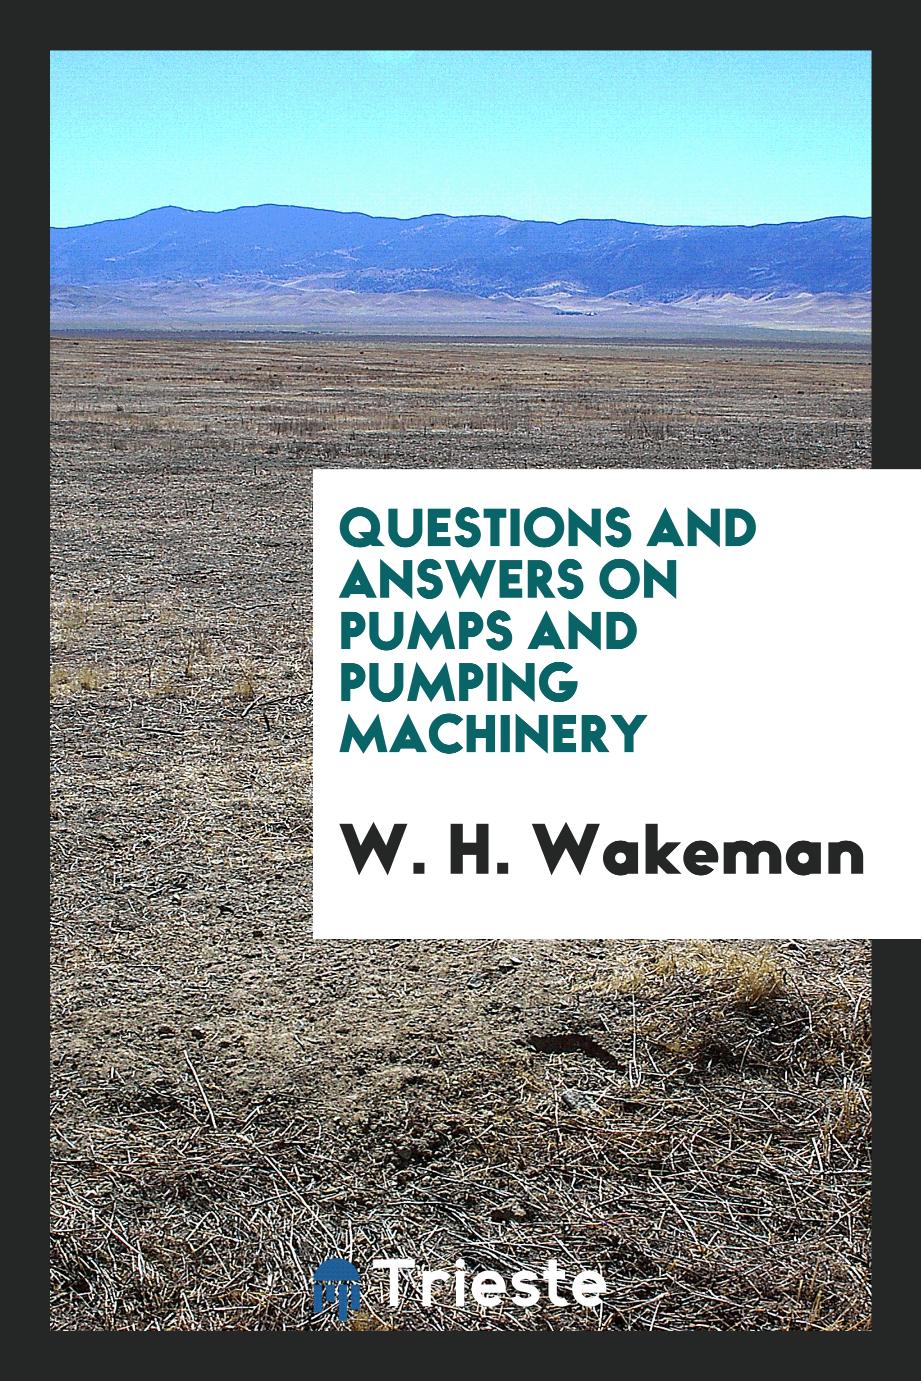 Questions and Answers on Pumps and Pumping Machinery